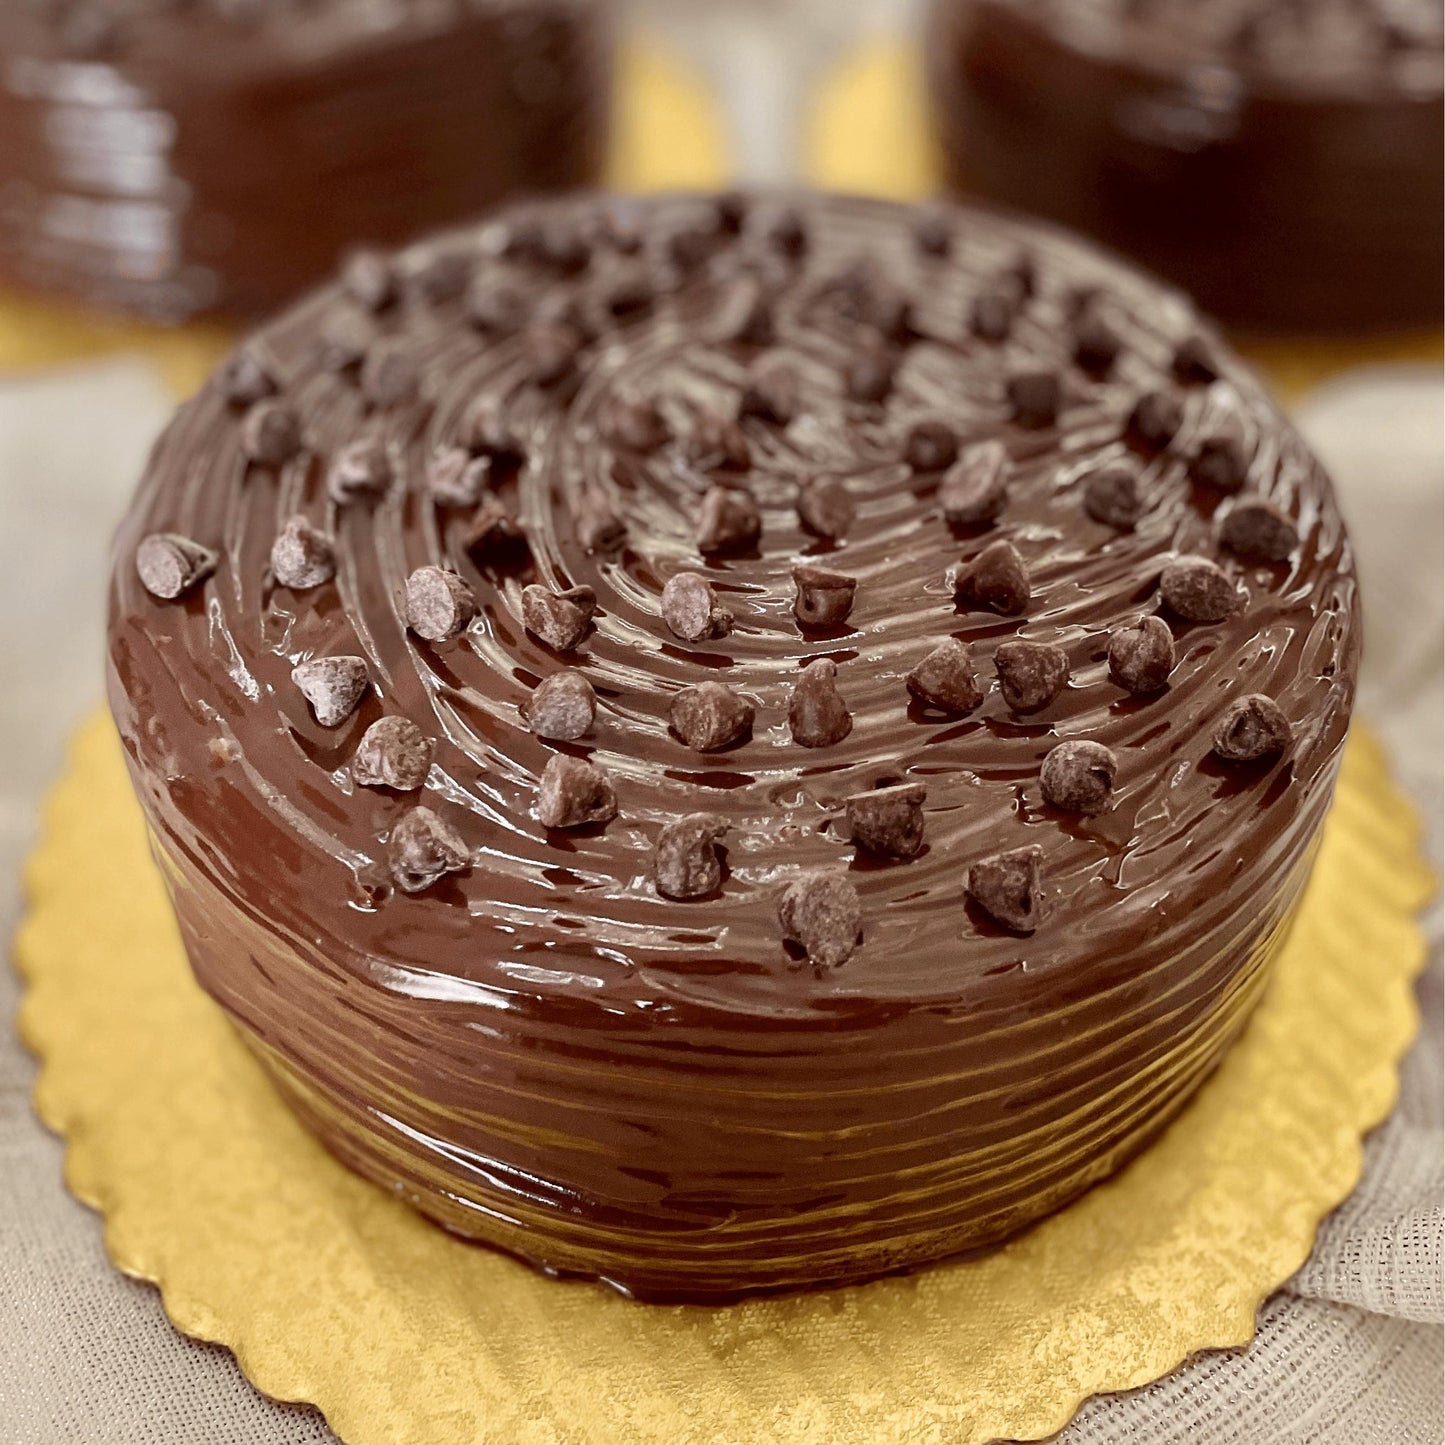 
                  
                    Gluten-free, dairy-free, sugar-free Vanilla and Chocolate, Marvelous Marble Full Life cake, featuring layers of moist vanilla and rich dark chocolate, topped with sugar-free chocolate syrup and extra chocolate chips for a luxurious finish. Full Life Gourmet Bakery
                  
                